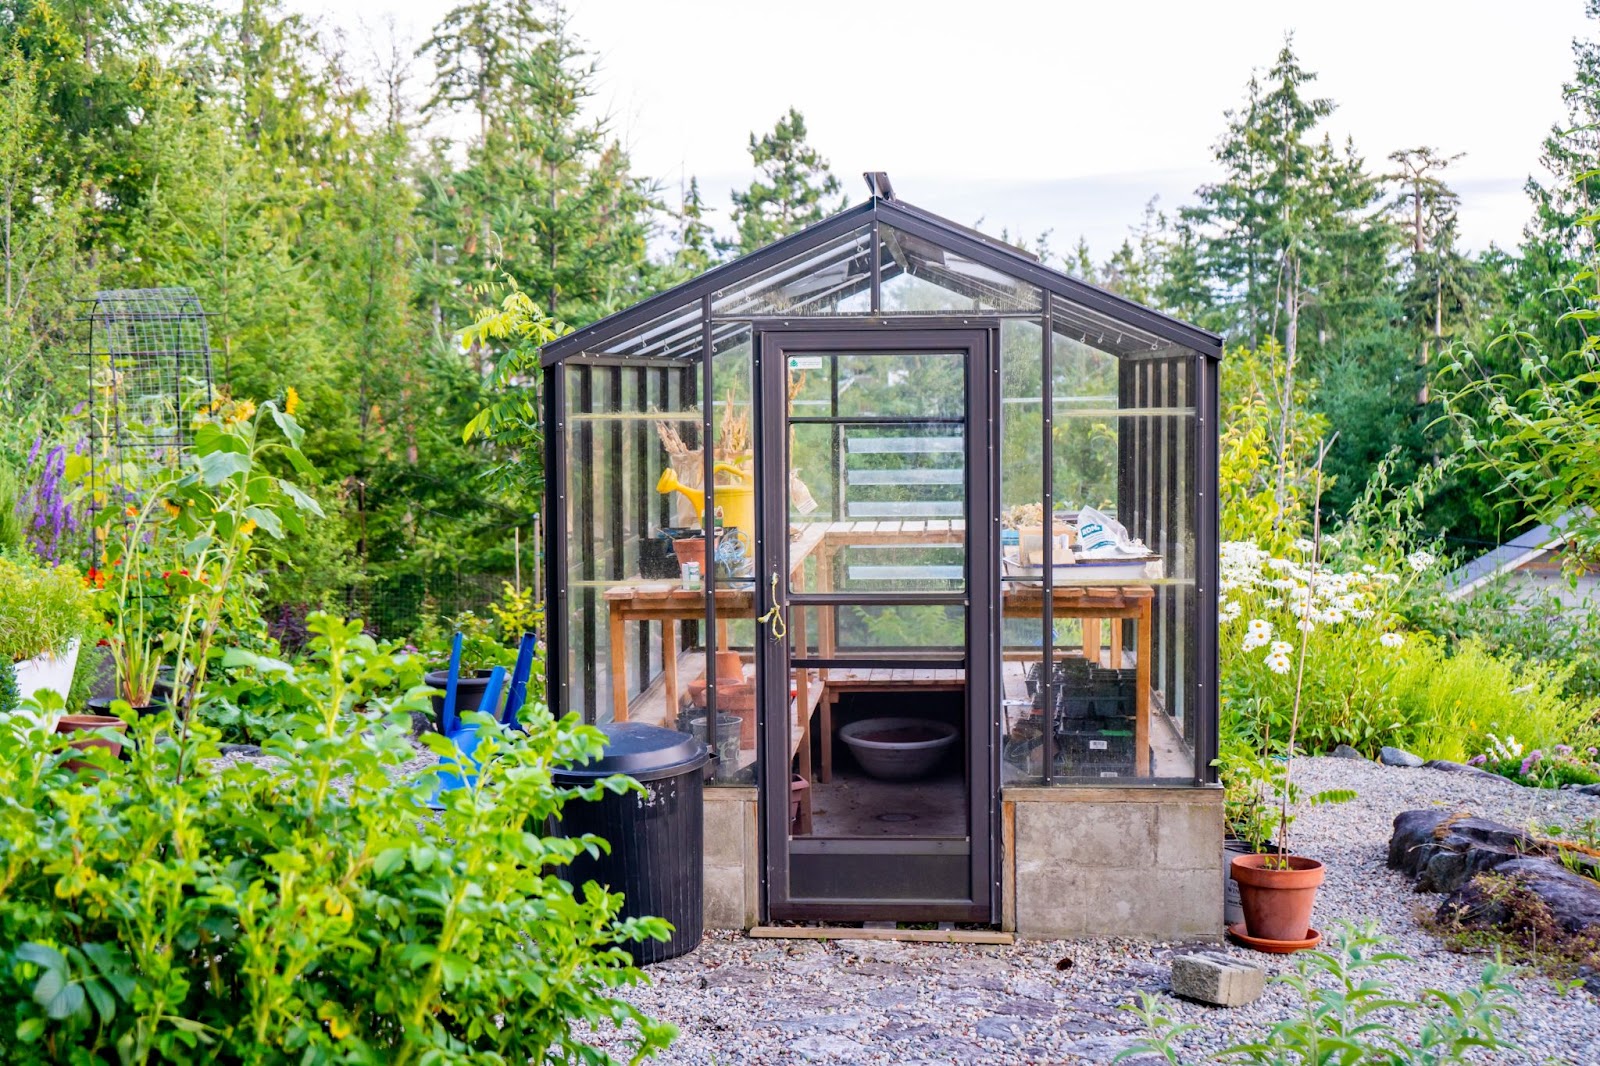 A clean greenhouse in the middle of a thriving allotment